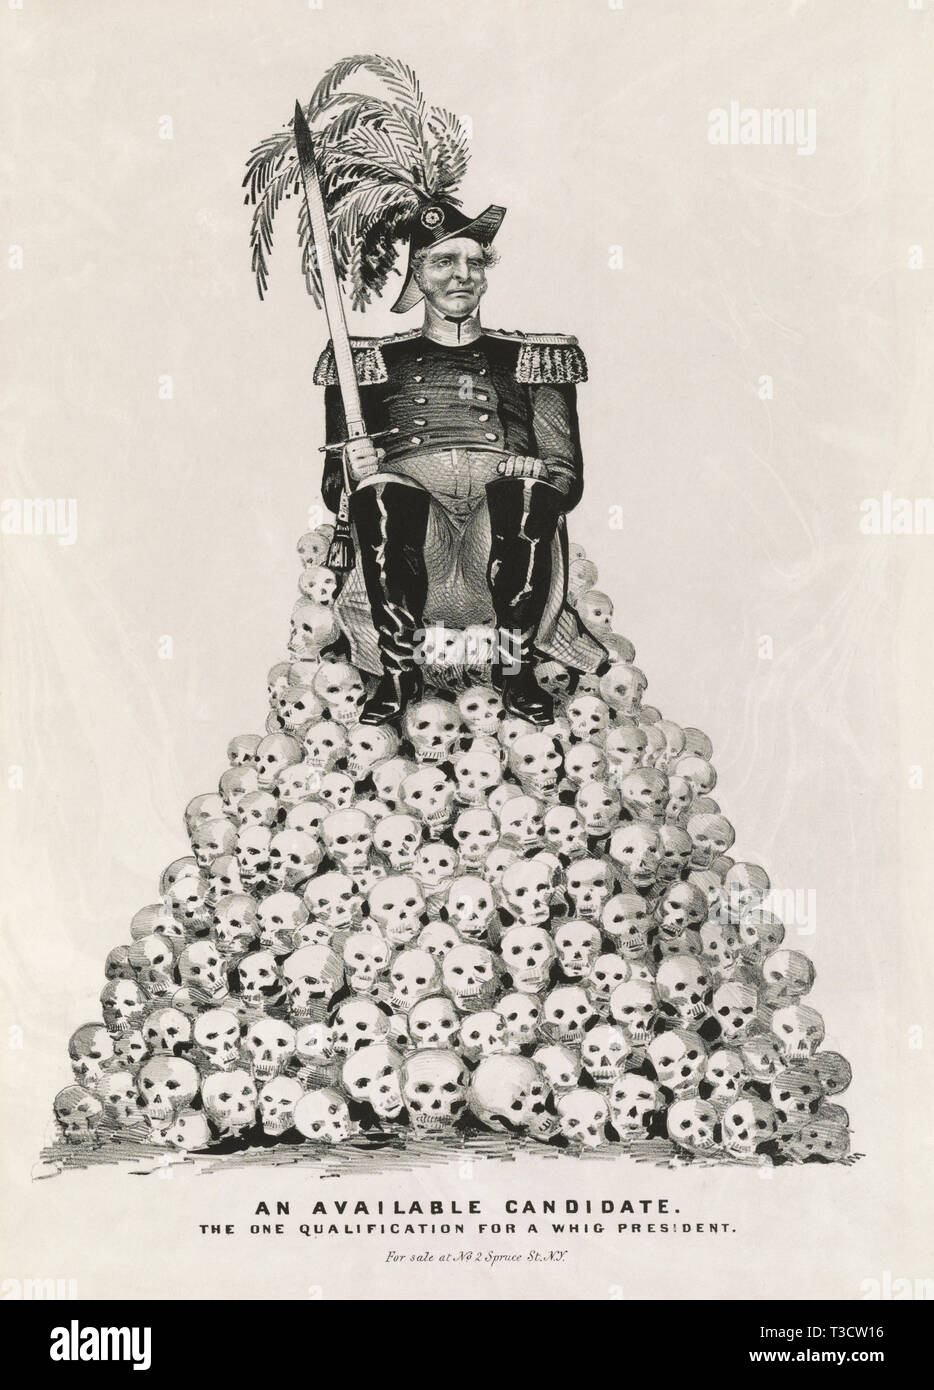 An Available Candidate--the one Qualification for a Whig President, Man in Military Uniform, either Zachary Taylor or Winfield Scott who were both Contenders for the Whig Nomination, Holding a Blood-Stained Sword while Seated on Pile of Skulls, Political Cartoon, Nathaniel Currier, 1848 Stock Photo